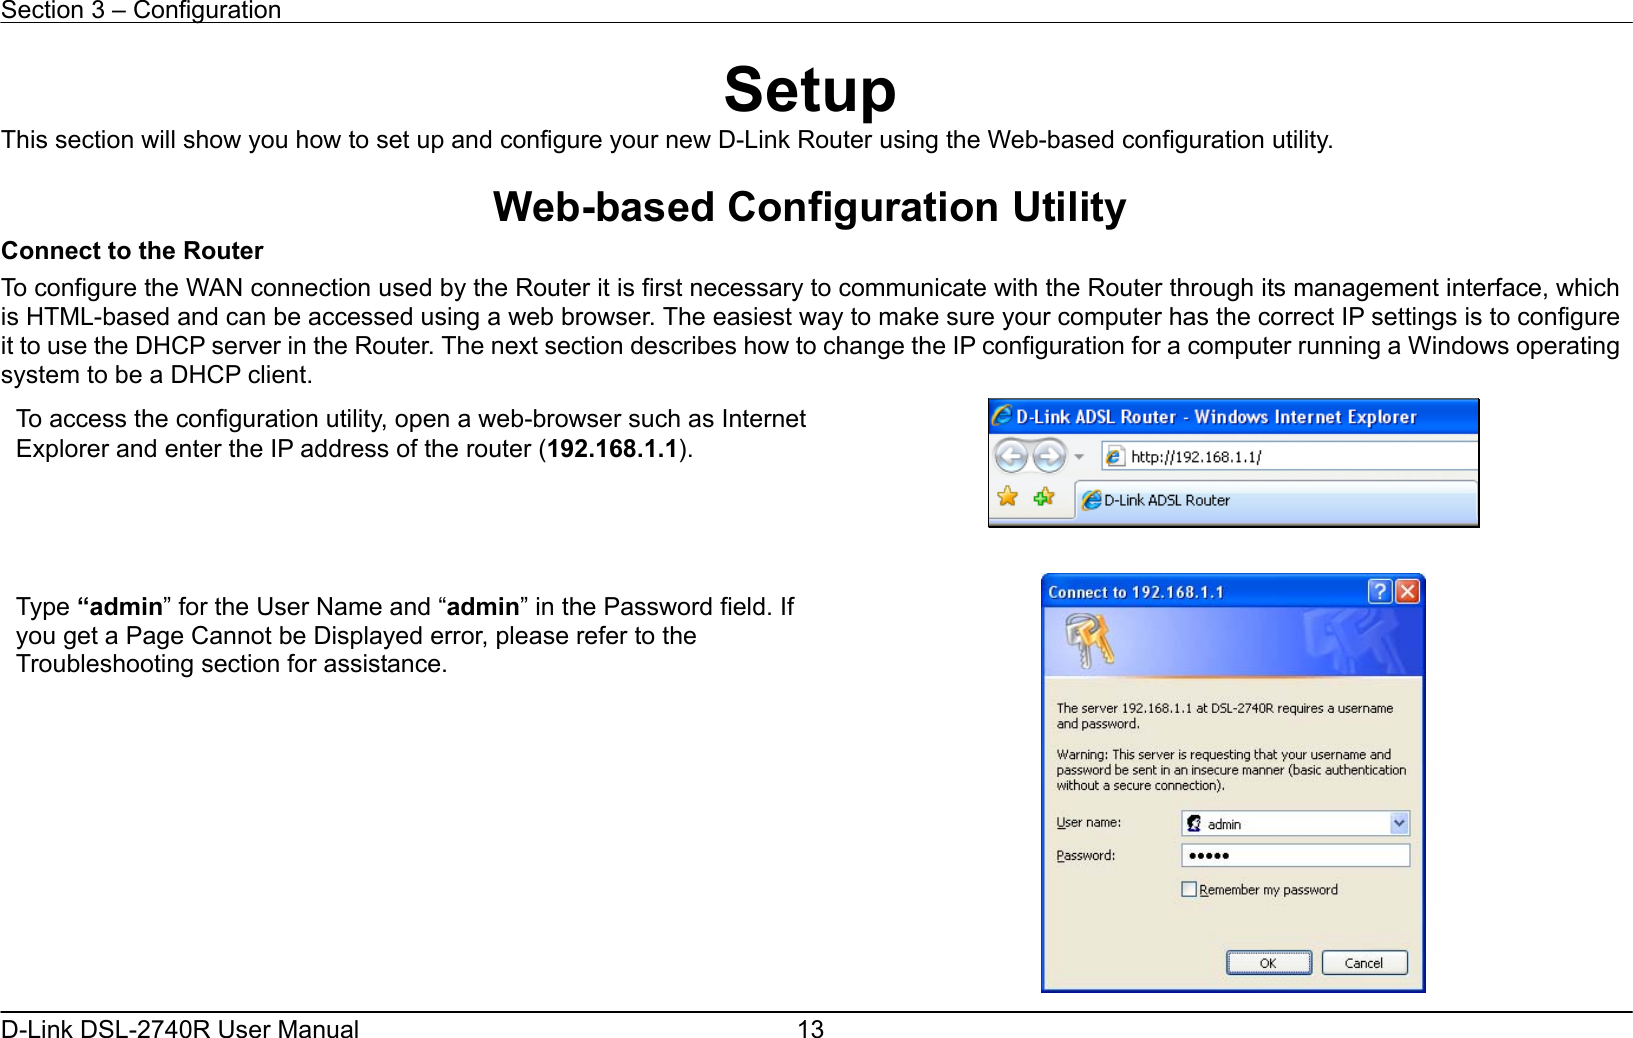 Section 3 – Configuration   D-Link DSL-2740R User Manual  13Setup This section will show you how to set up and configure your new D-Link Router using the Web-based configuration utility.  Web-based Configuration Utility Connect to the Router To configure the WAN connection used by the Router it is first necessary to communicate with the Router through its management interface, which is HTML-based and can be accessed using a web browser. The easiest way to make sure your computer has the correct IP settings is to configure it to use the DHCP server in the Router. The next section describes how to change the IP configuration for a computer running a Windows operating system to be a DHCP client.    To access the configuration utility, open a web-browser such as Internet Explorer and enter the IP address of the router (192.168.1.1). Type “admin” for the User Name and “admin” in the Password field. If you get a Page Cannot be Displayed error, please refer to the Troubleshooting section for assistance. 